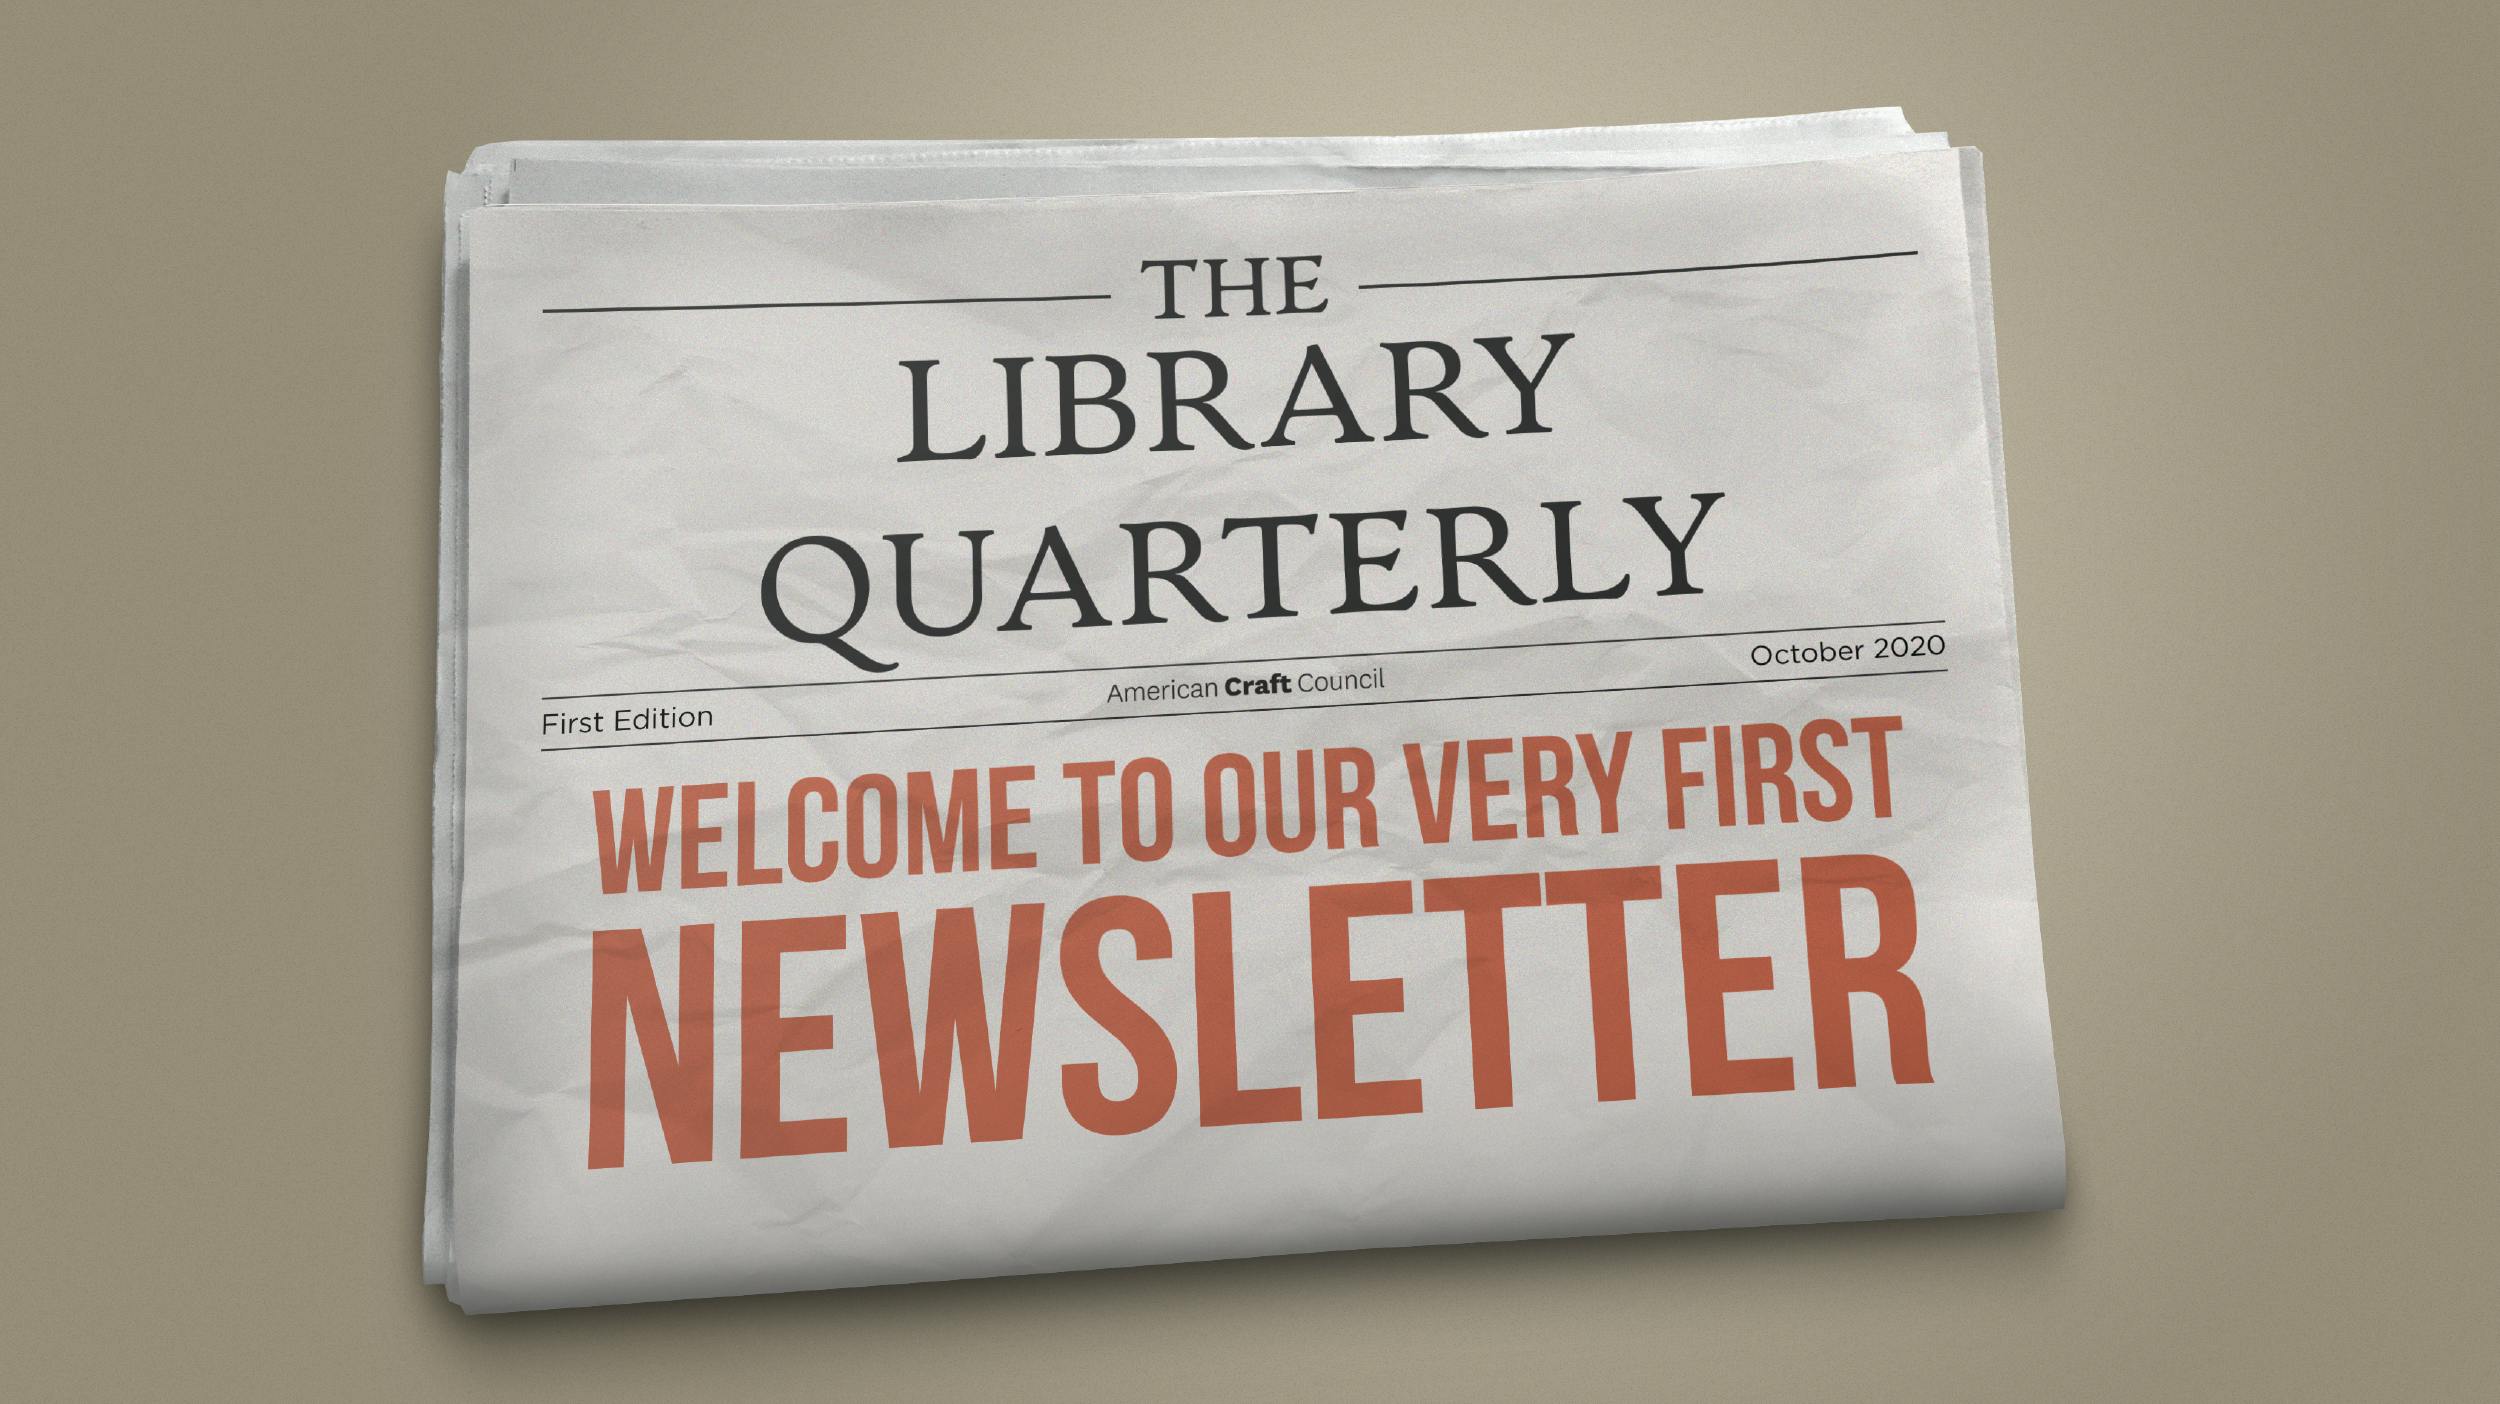 Library Quarterly Issue 1 Fall 2020